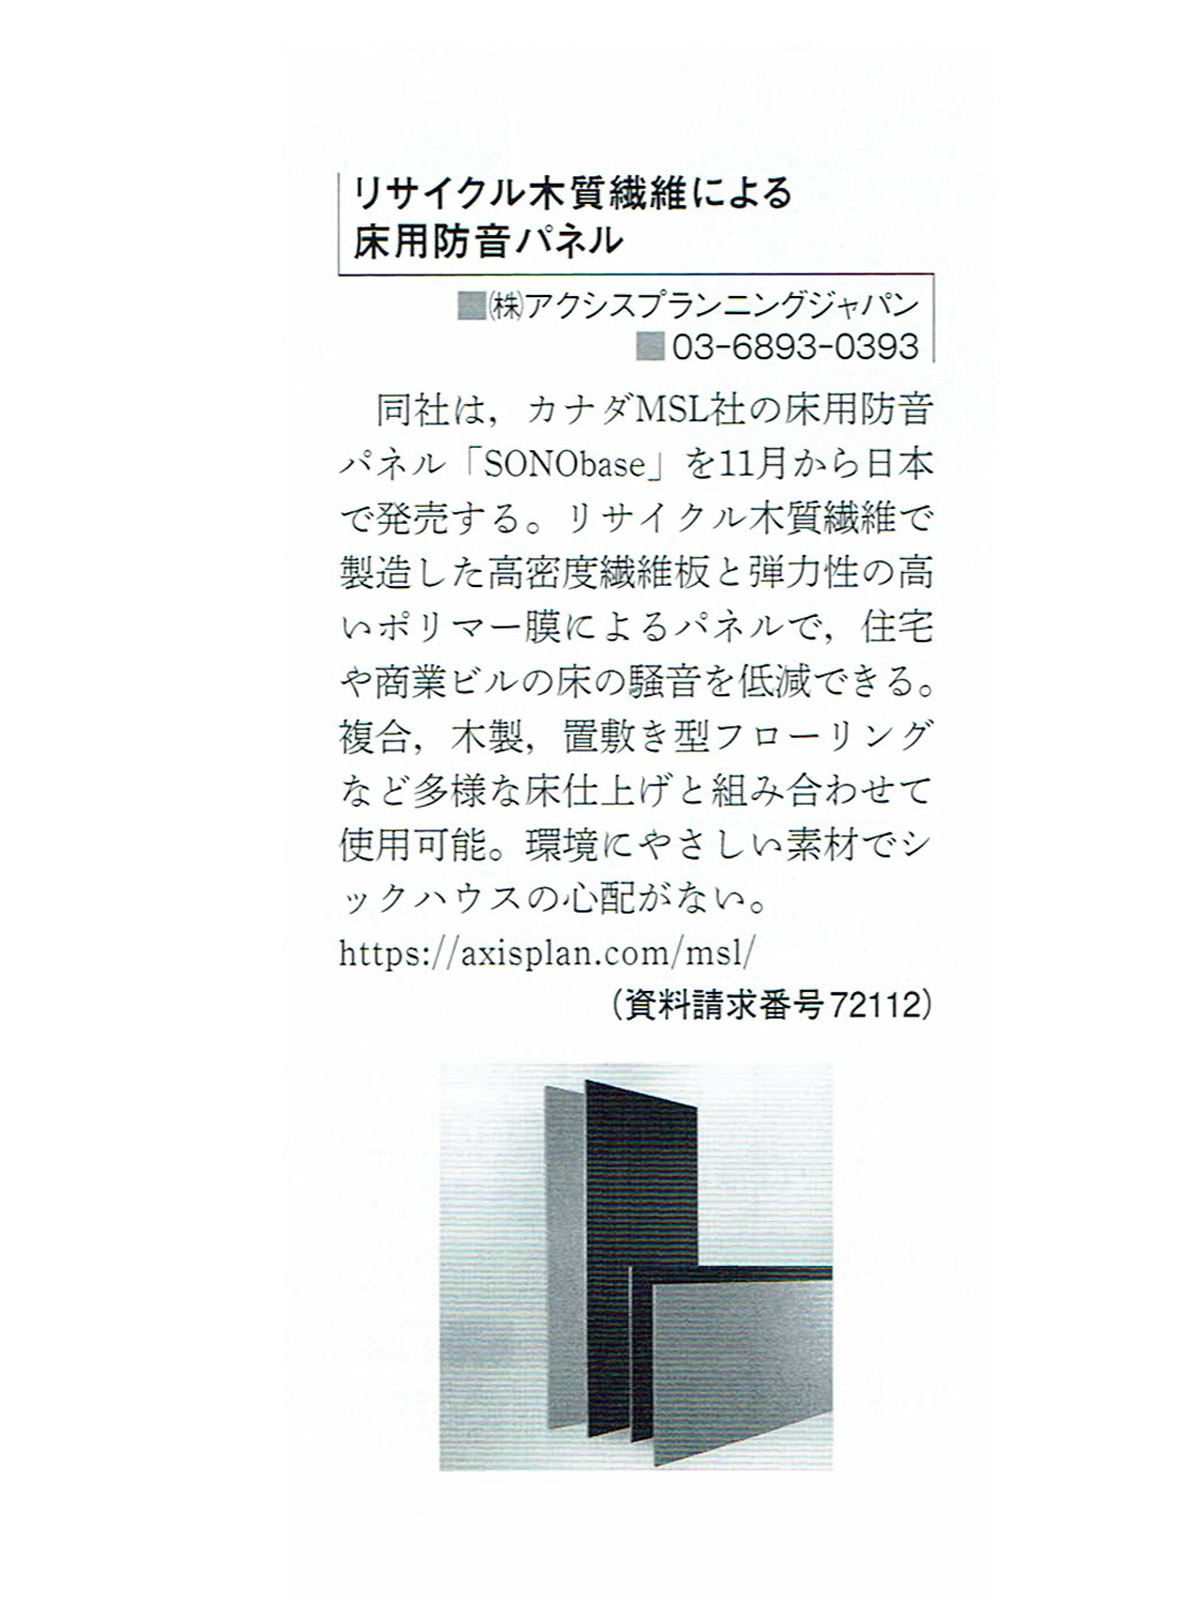 MSL Soundproofing SONObase Magazine Article